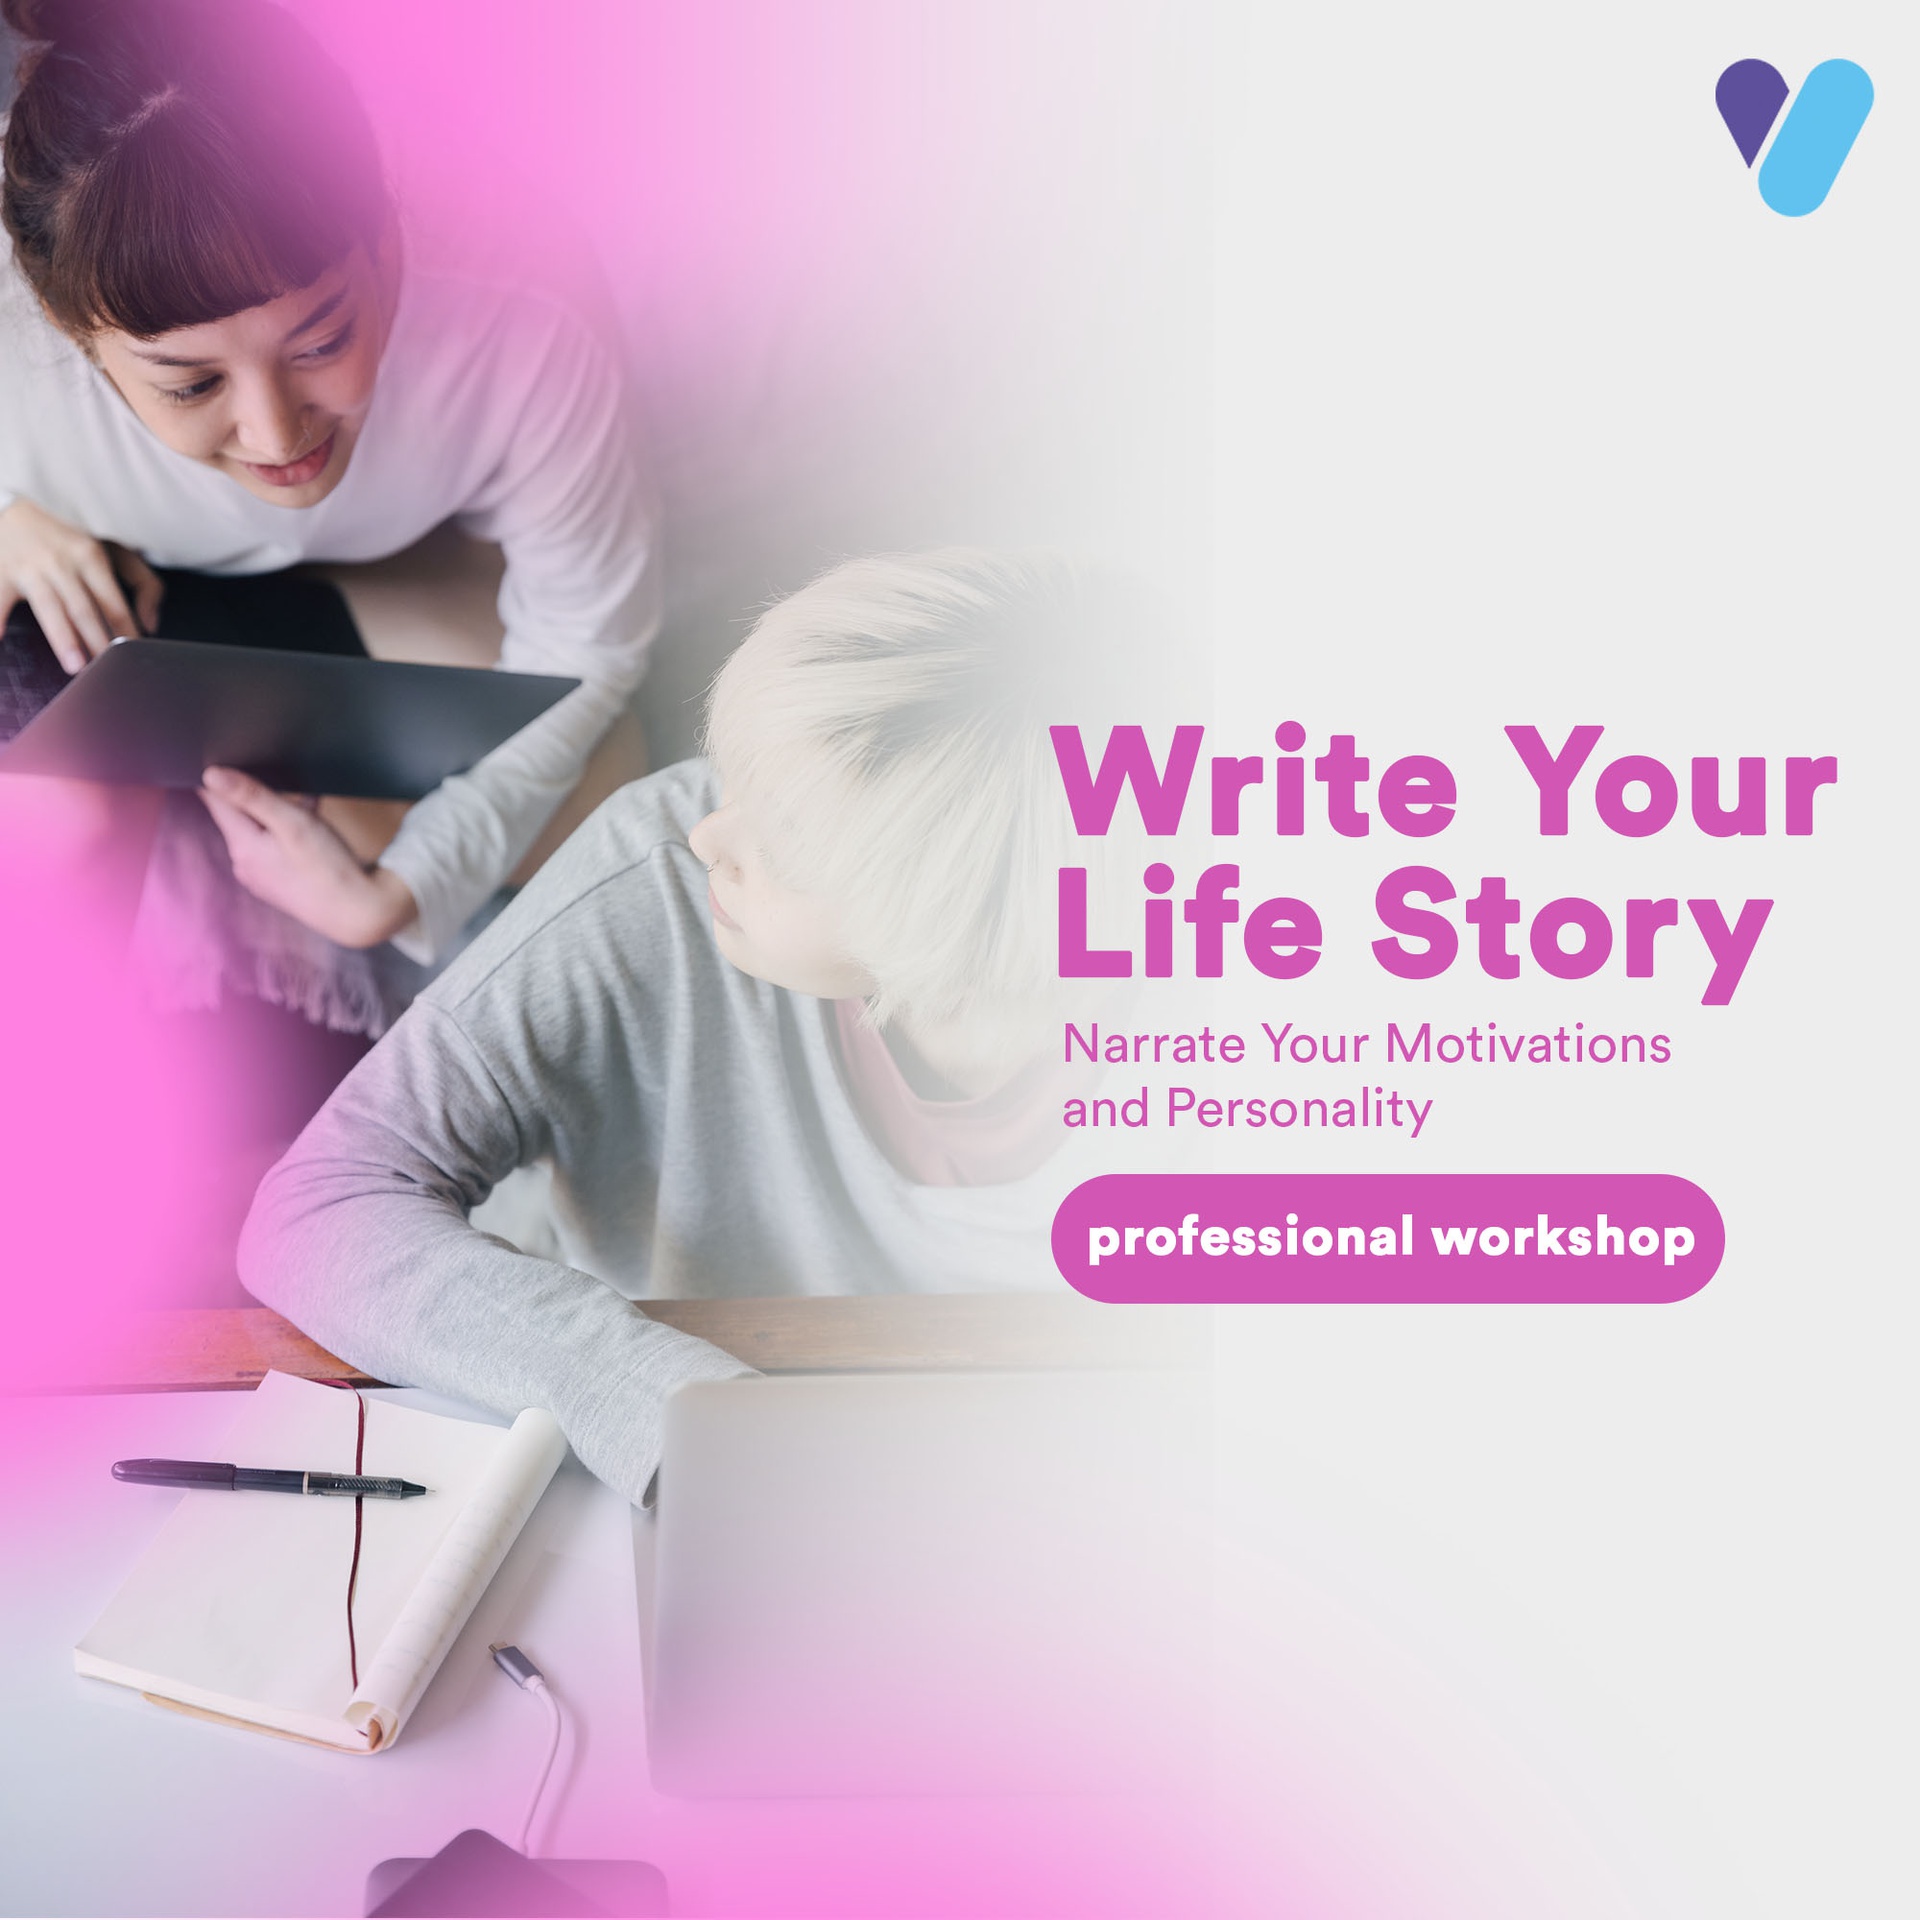 Write Your Life Story: Narrate Your Motivations and Personality